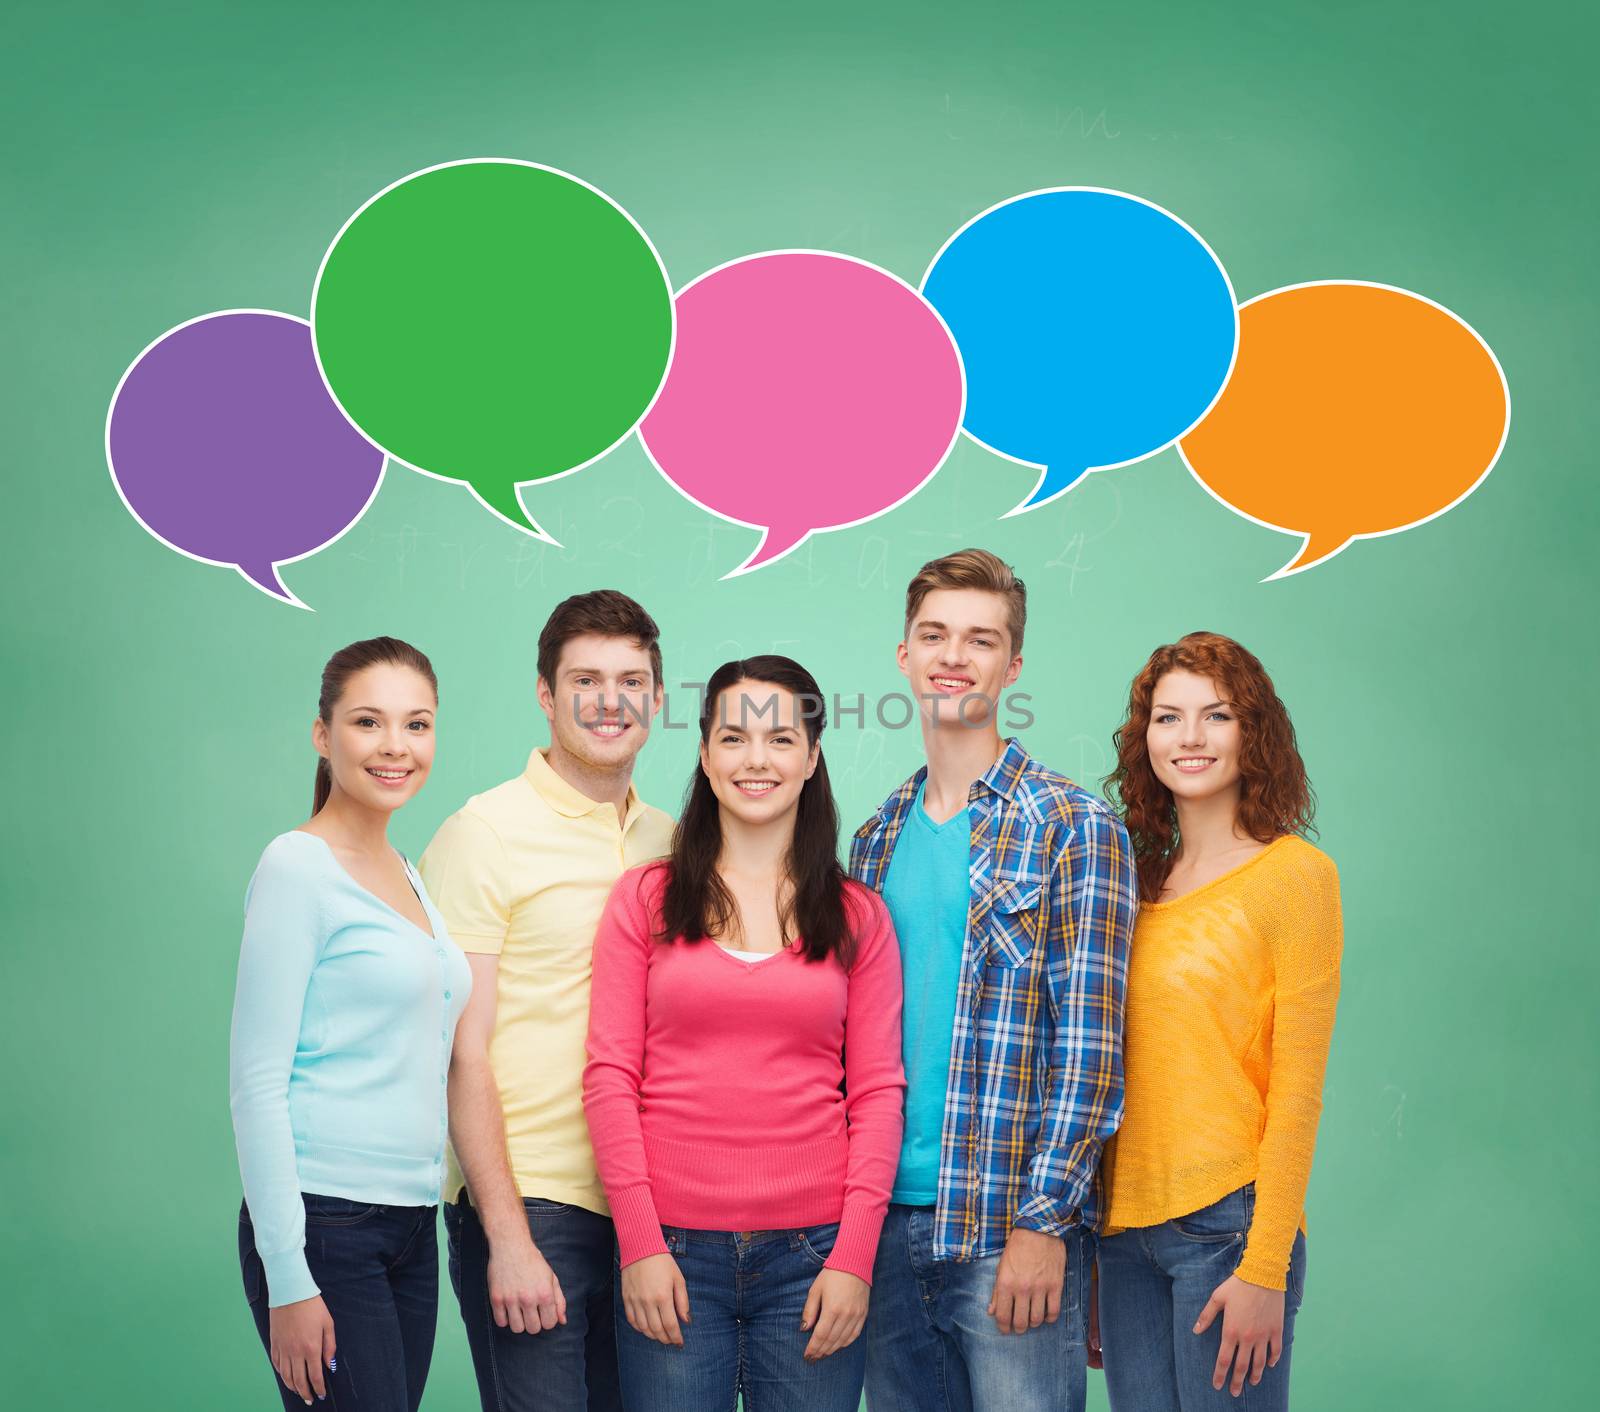 group of smiling teenagers with text bubbles by dolgachov